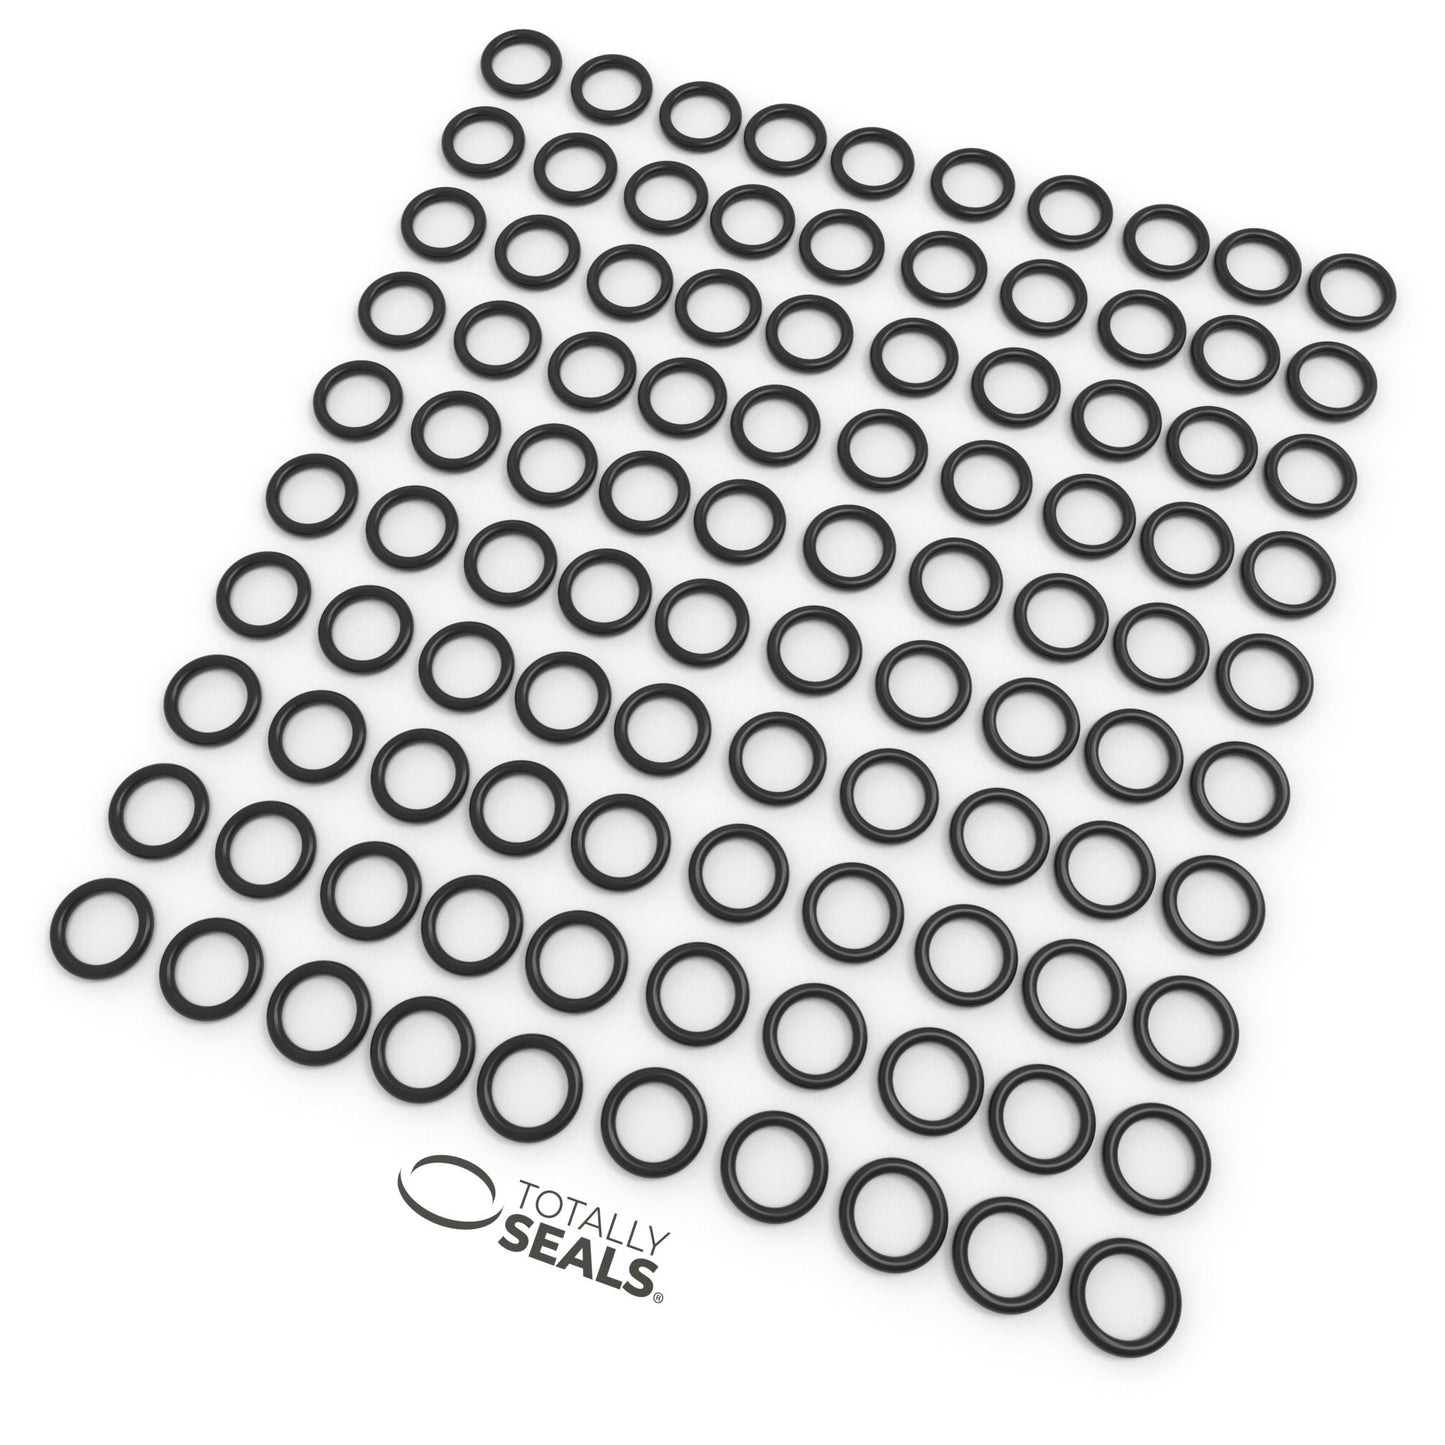 9mm x 3mm (15mm OD) Nitrile O-Rings - Totally Seals®